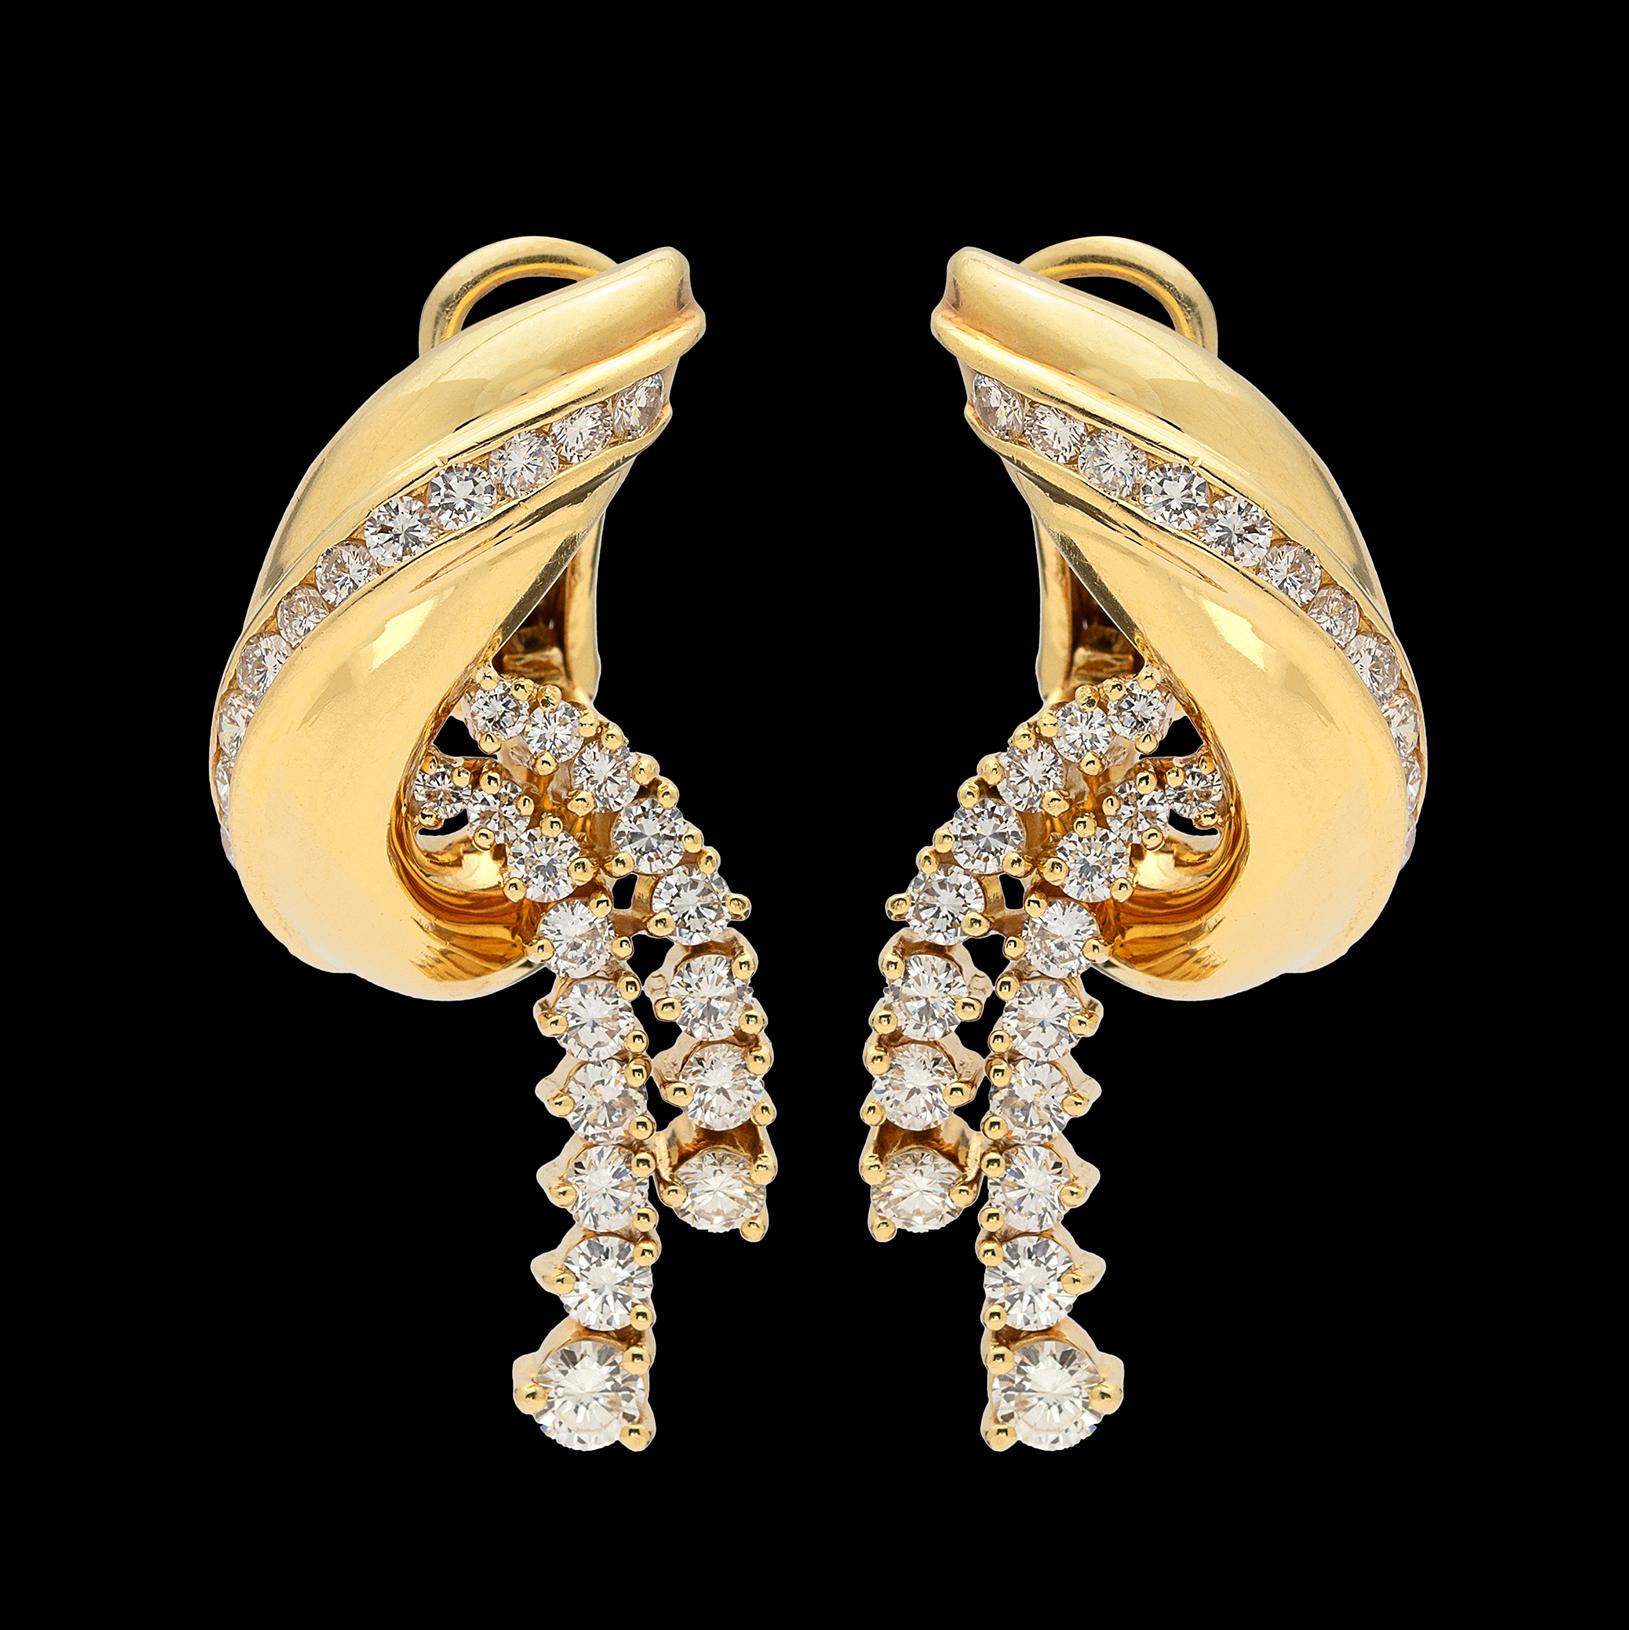 Beautifully made, these 18k gold earrings are articulated to move with you. Set with 56 cascading round brilliant-cut diamonds, of high G-H/VS quality, the gem weight totals approximately 3.20 carats. They weigh 19.6 grams and measure 1 1/2